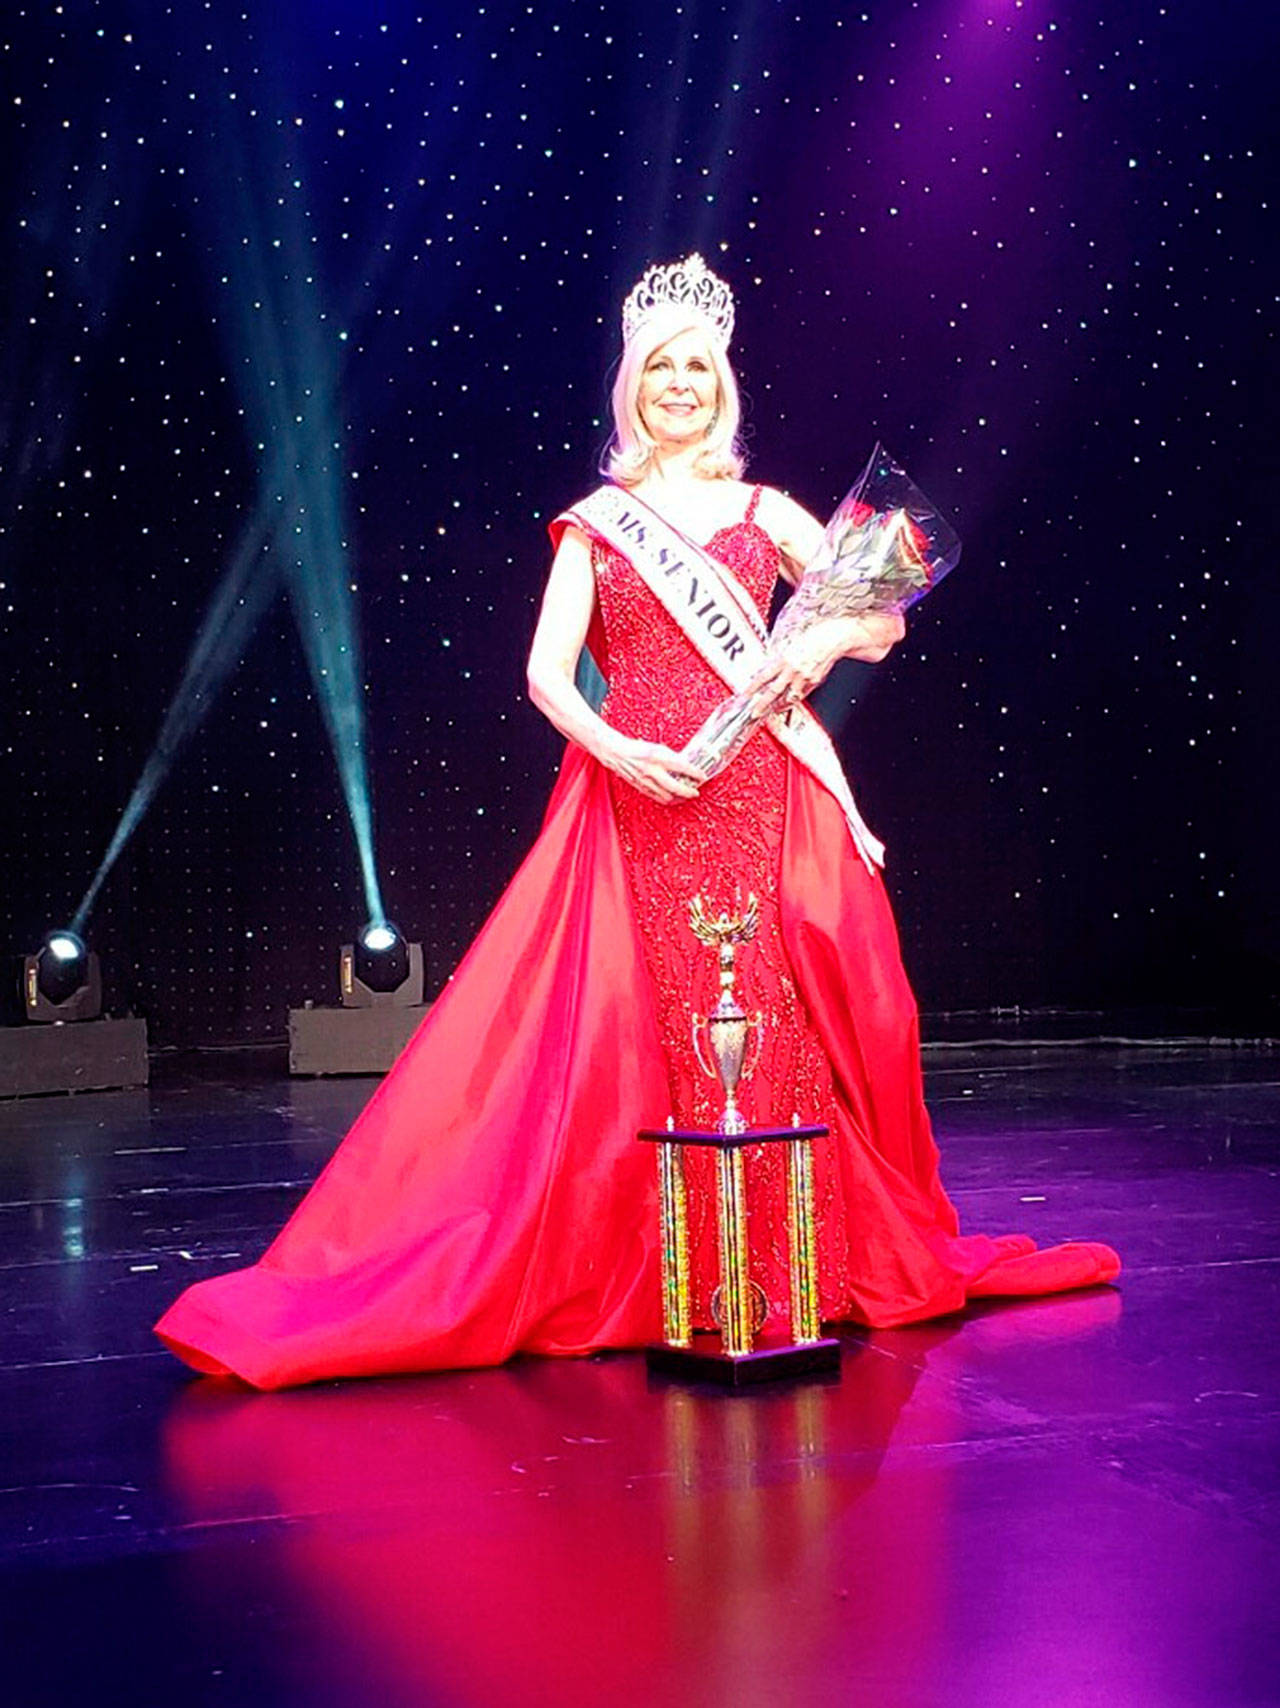 Port Angeles City Councilmember Cherie Kidd wins the Ms. Senior USA pageant in Las Vegas on Saturday.